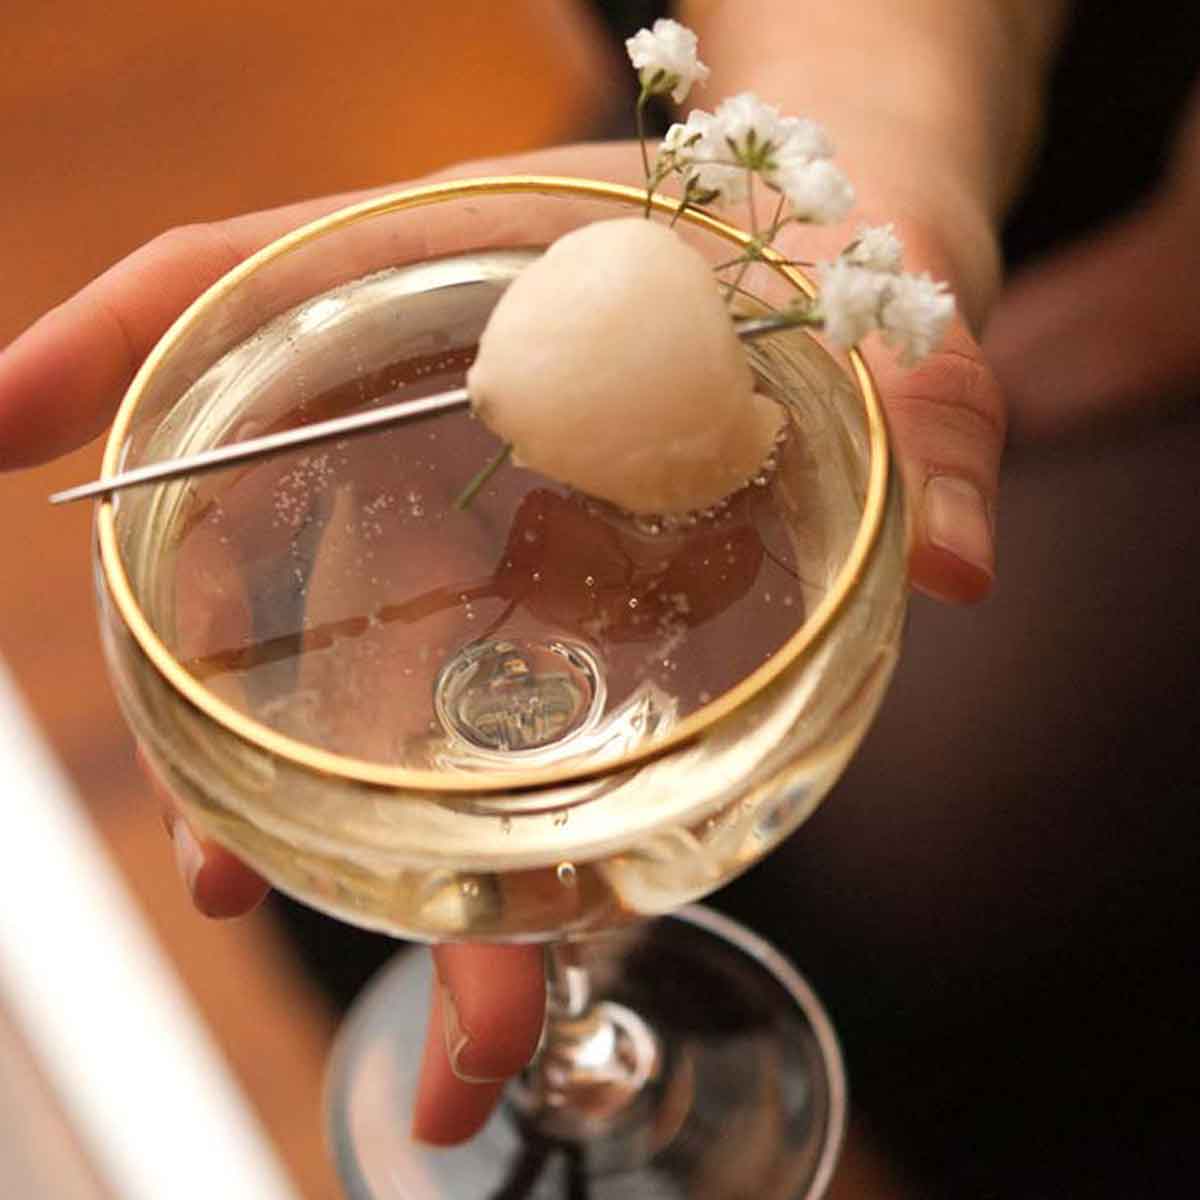 A hand holding a cocktail garnished with a lychee and baby's breath.